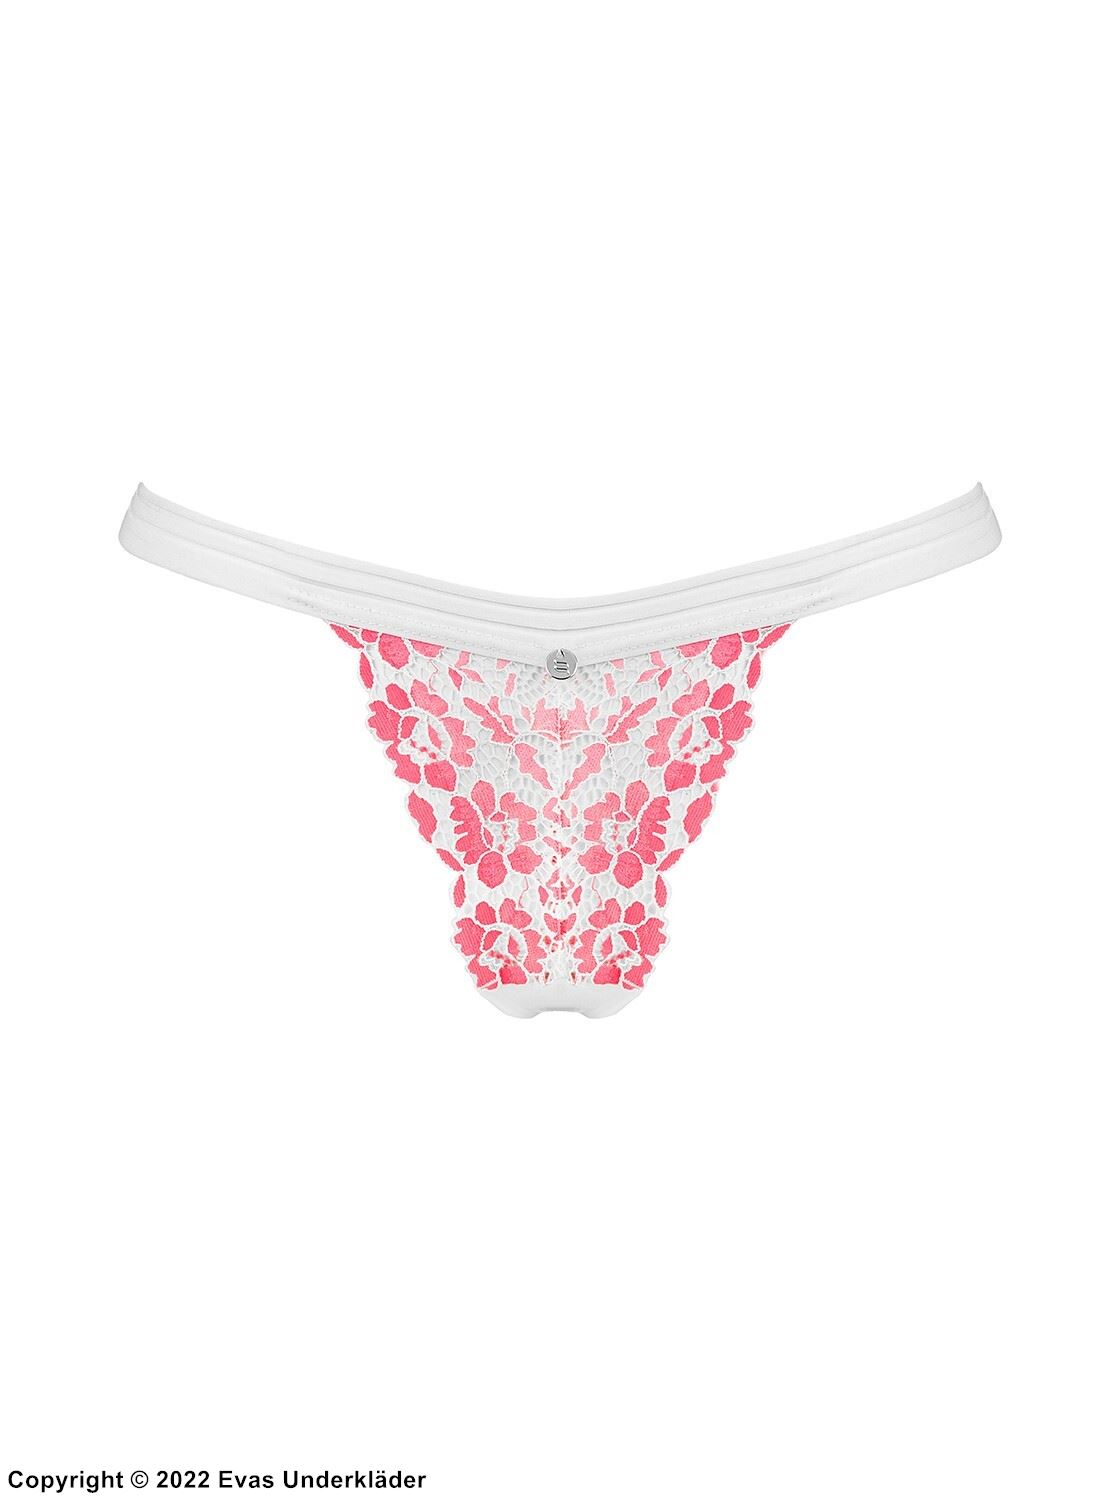 Romantic thong, openwork lace, flowers